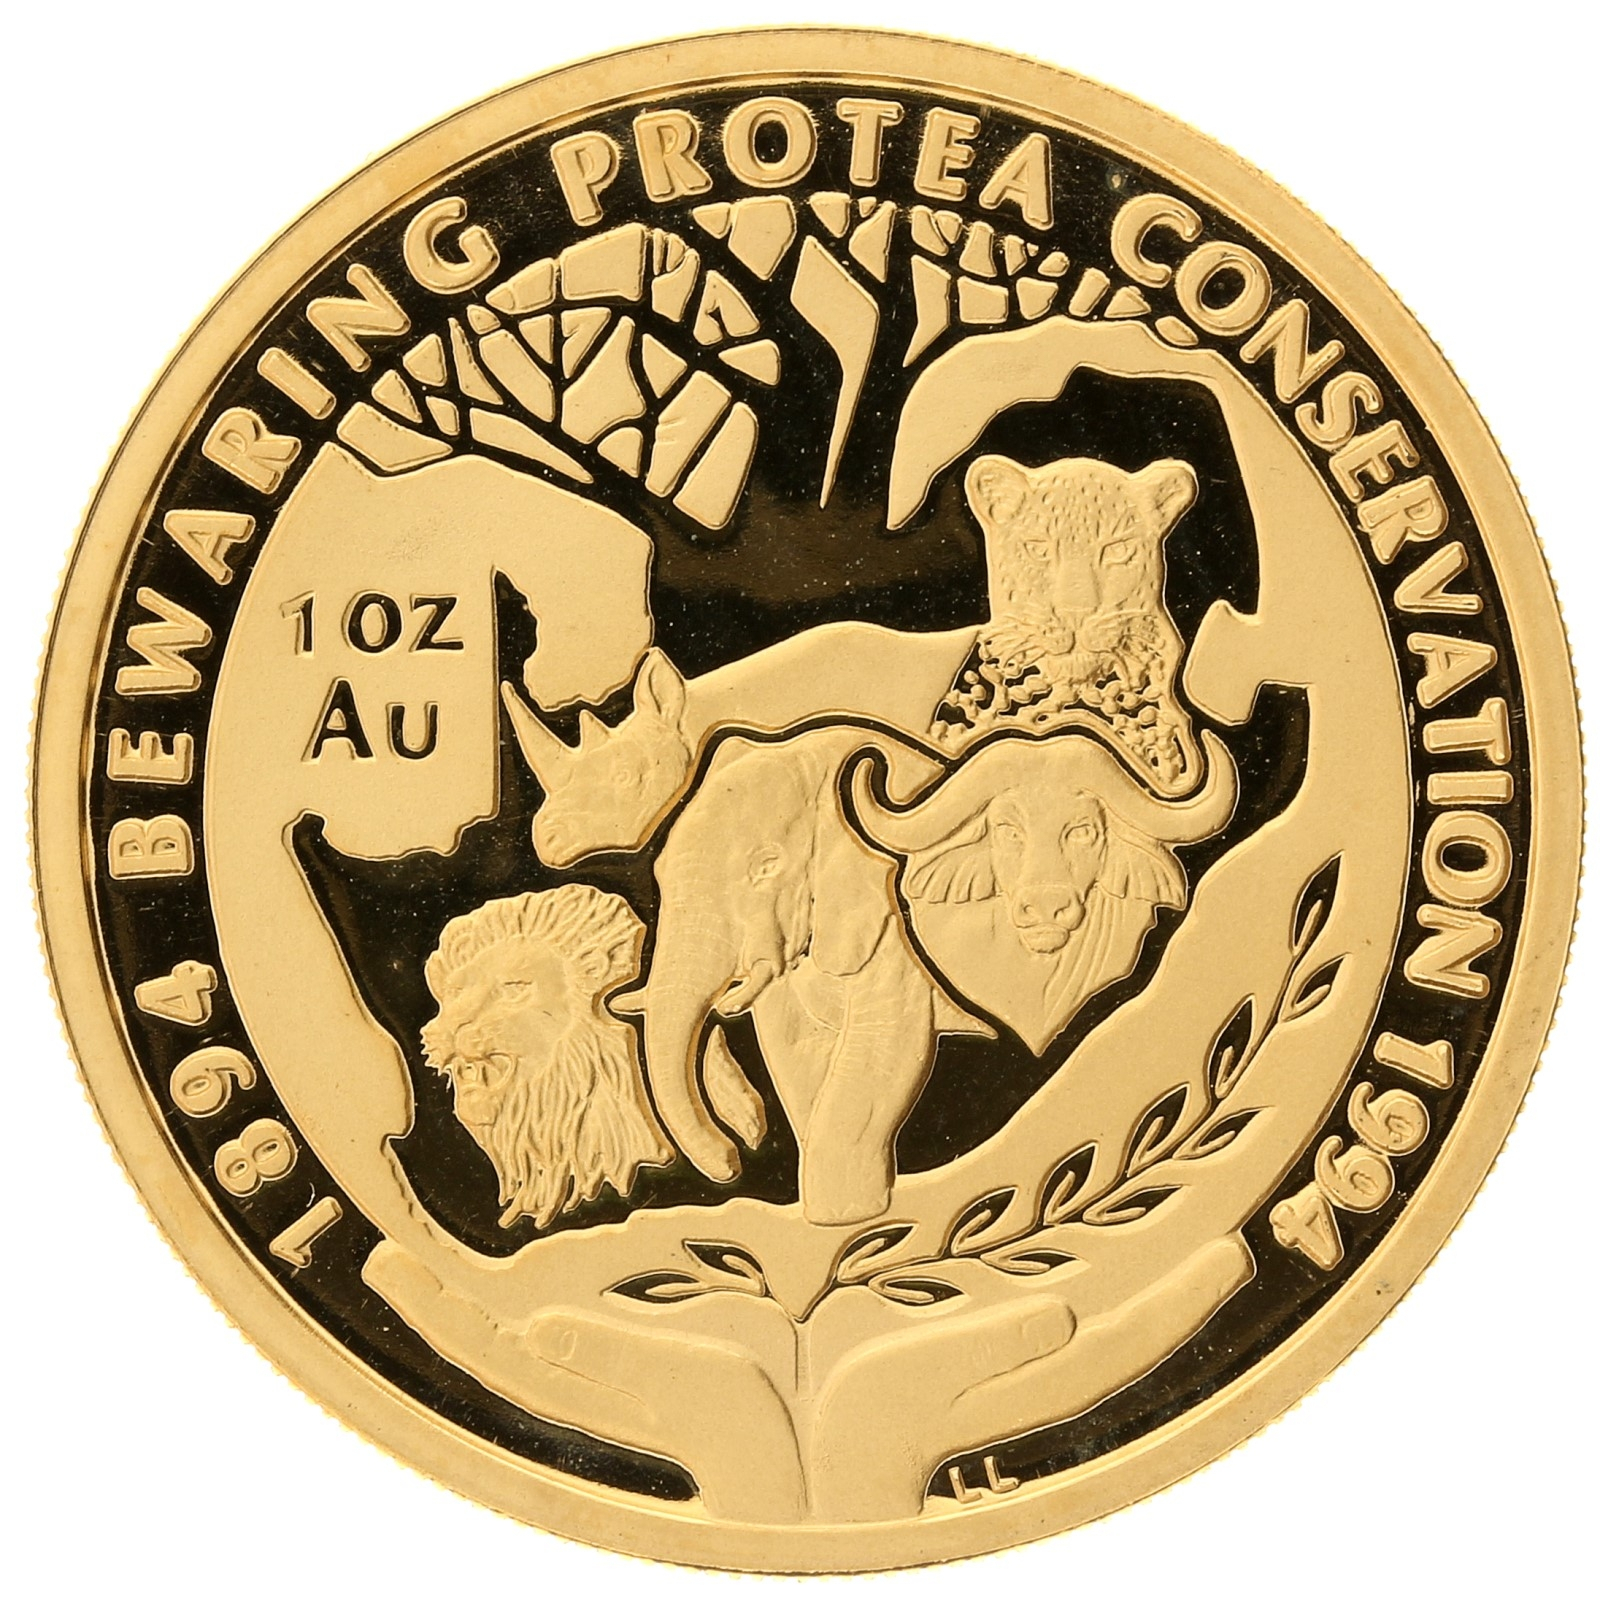 South Africa - 1 ounce - 1994 - Protea Conservation - 1oz